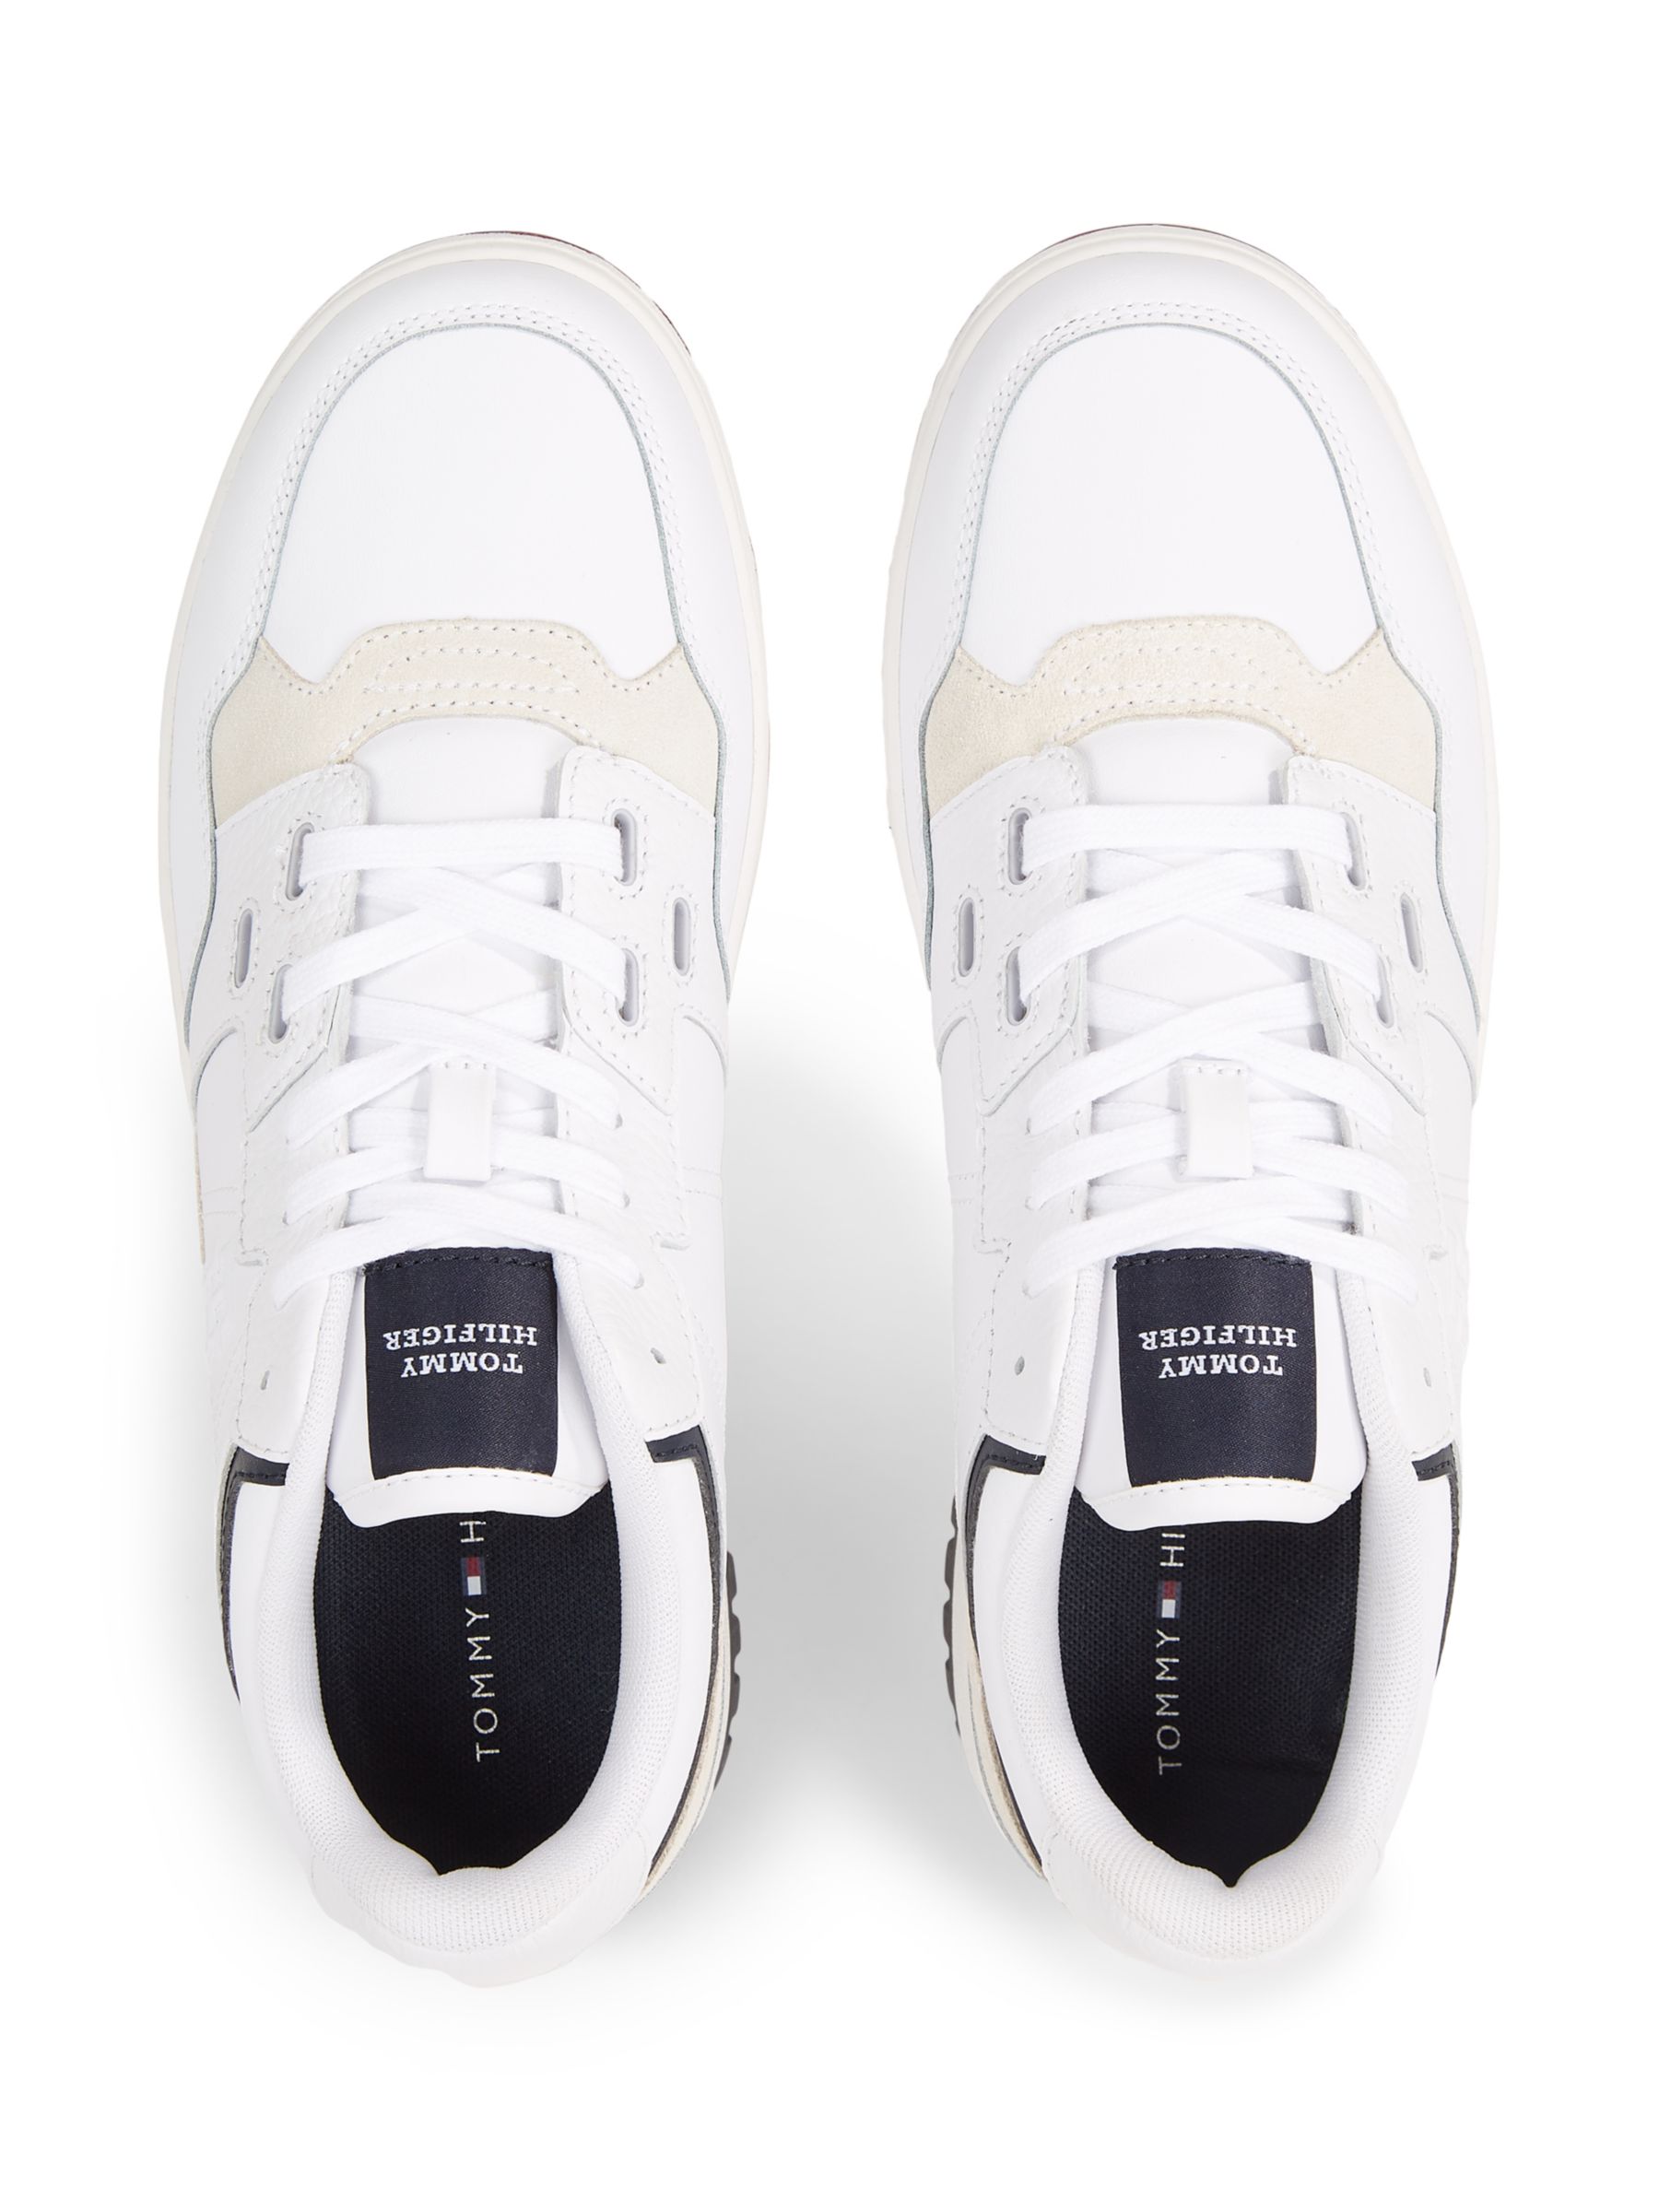 Tommy Hilfiger Basket Street Low Top Trainers, White, EU40